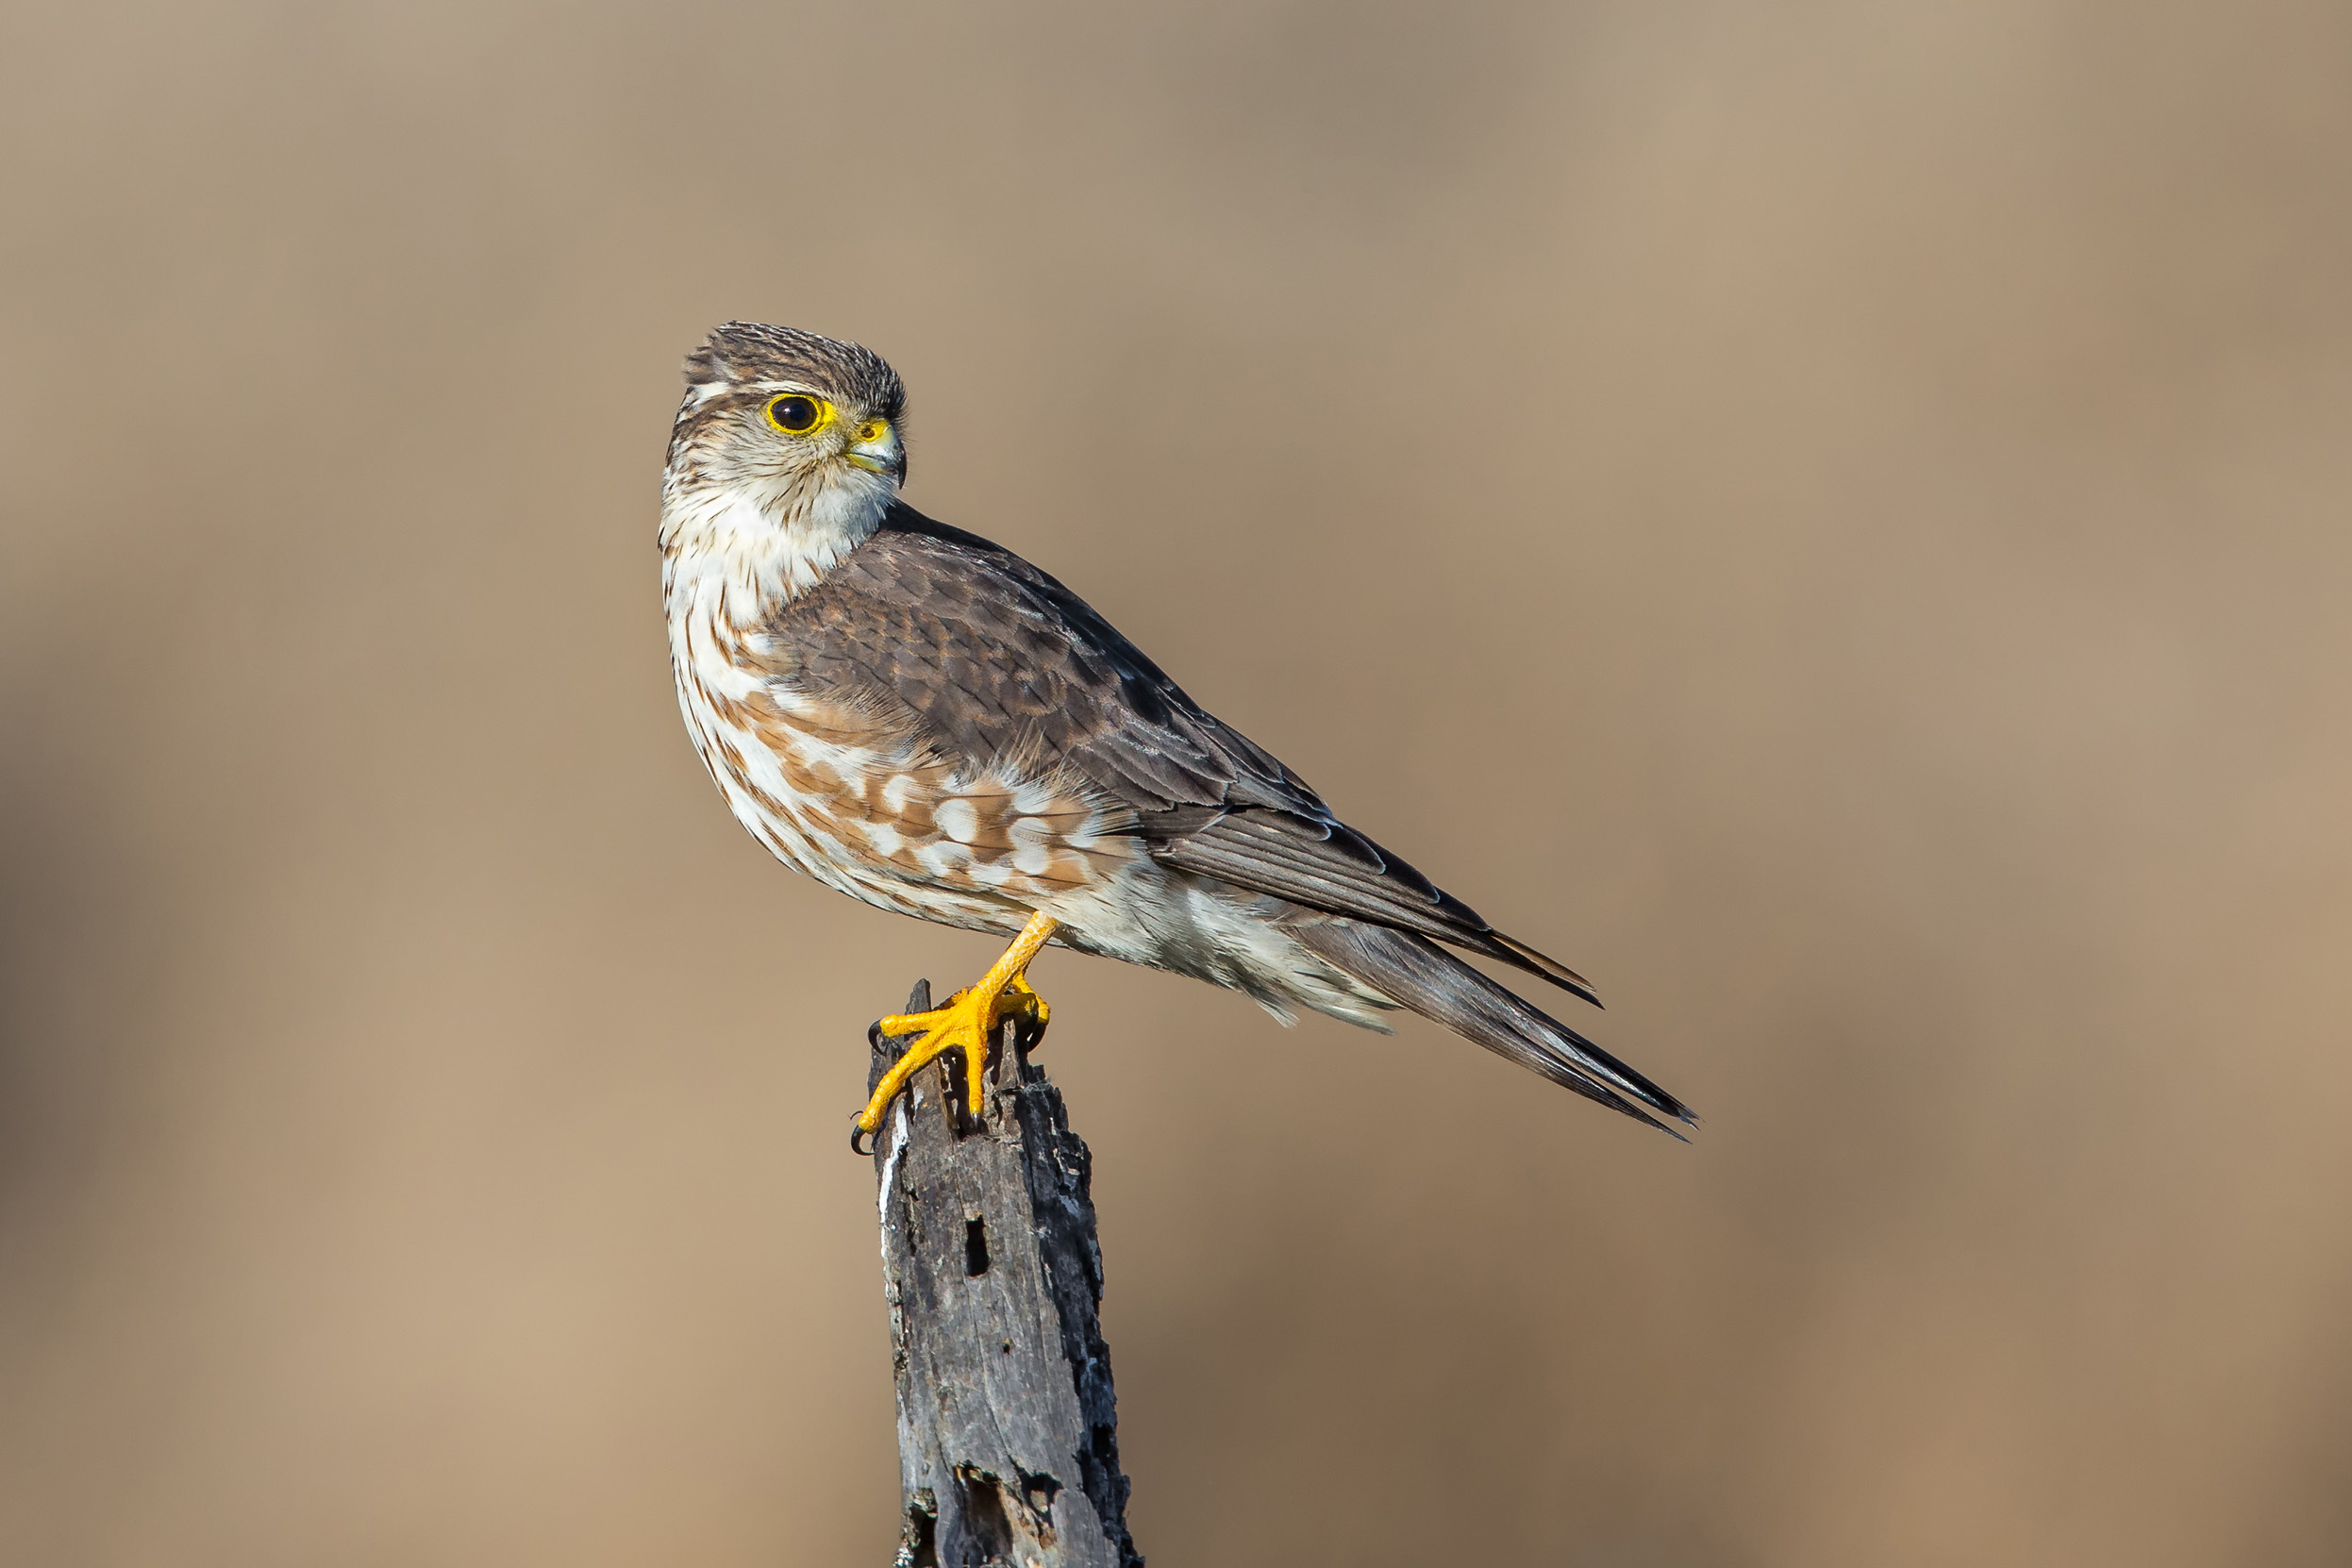 A female juvenile Merlin perched on a branch looking behind themselves.